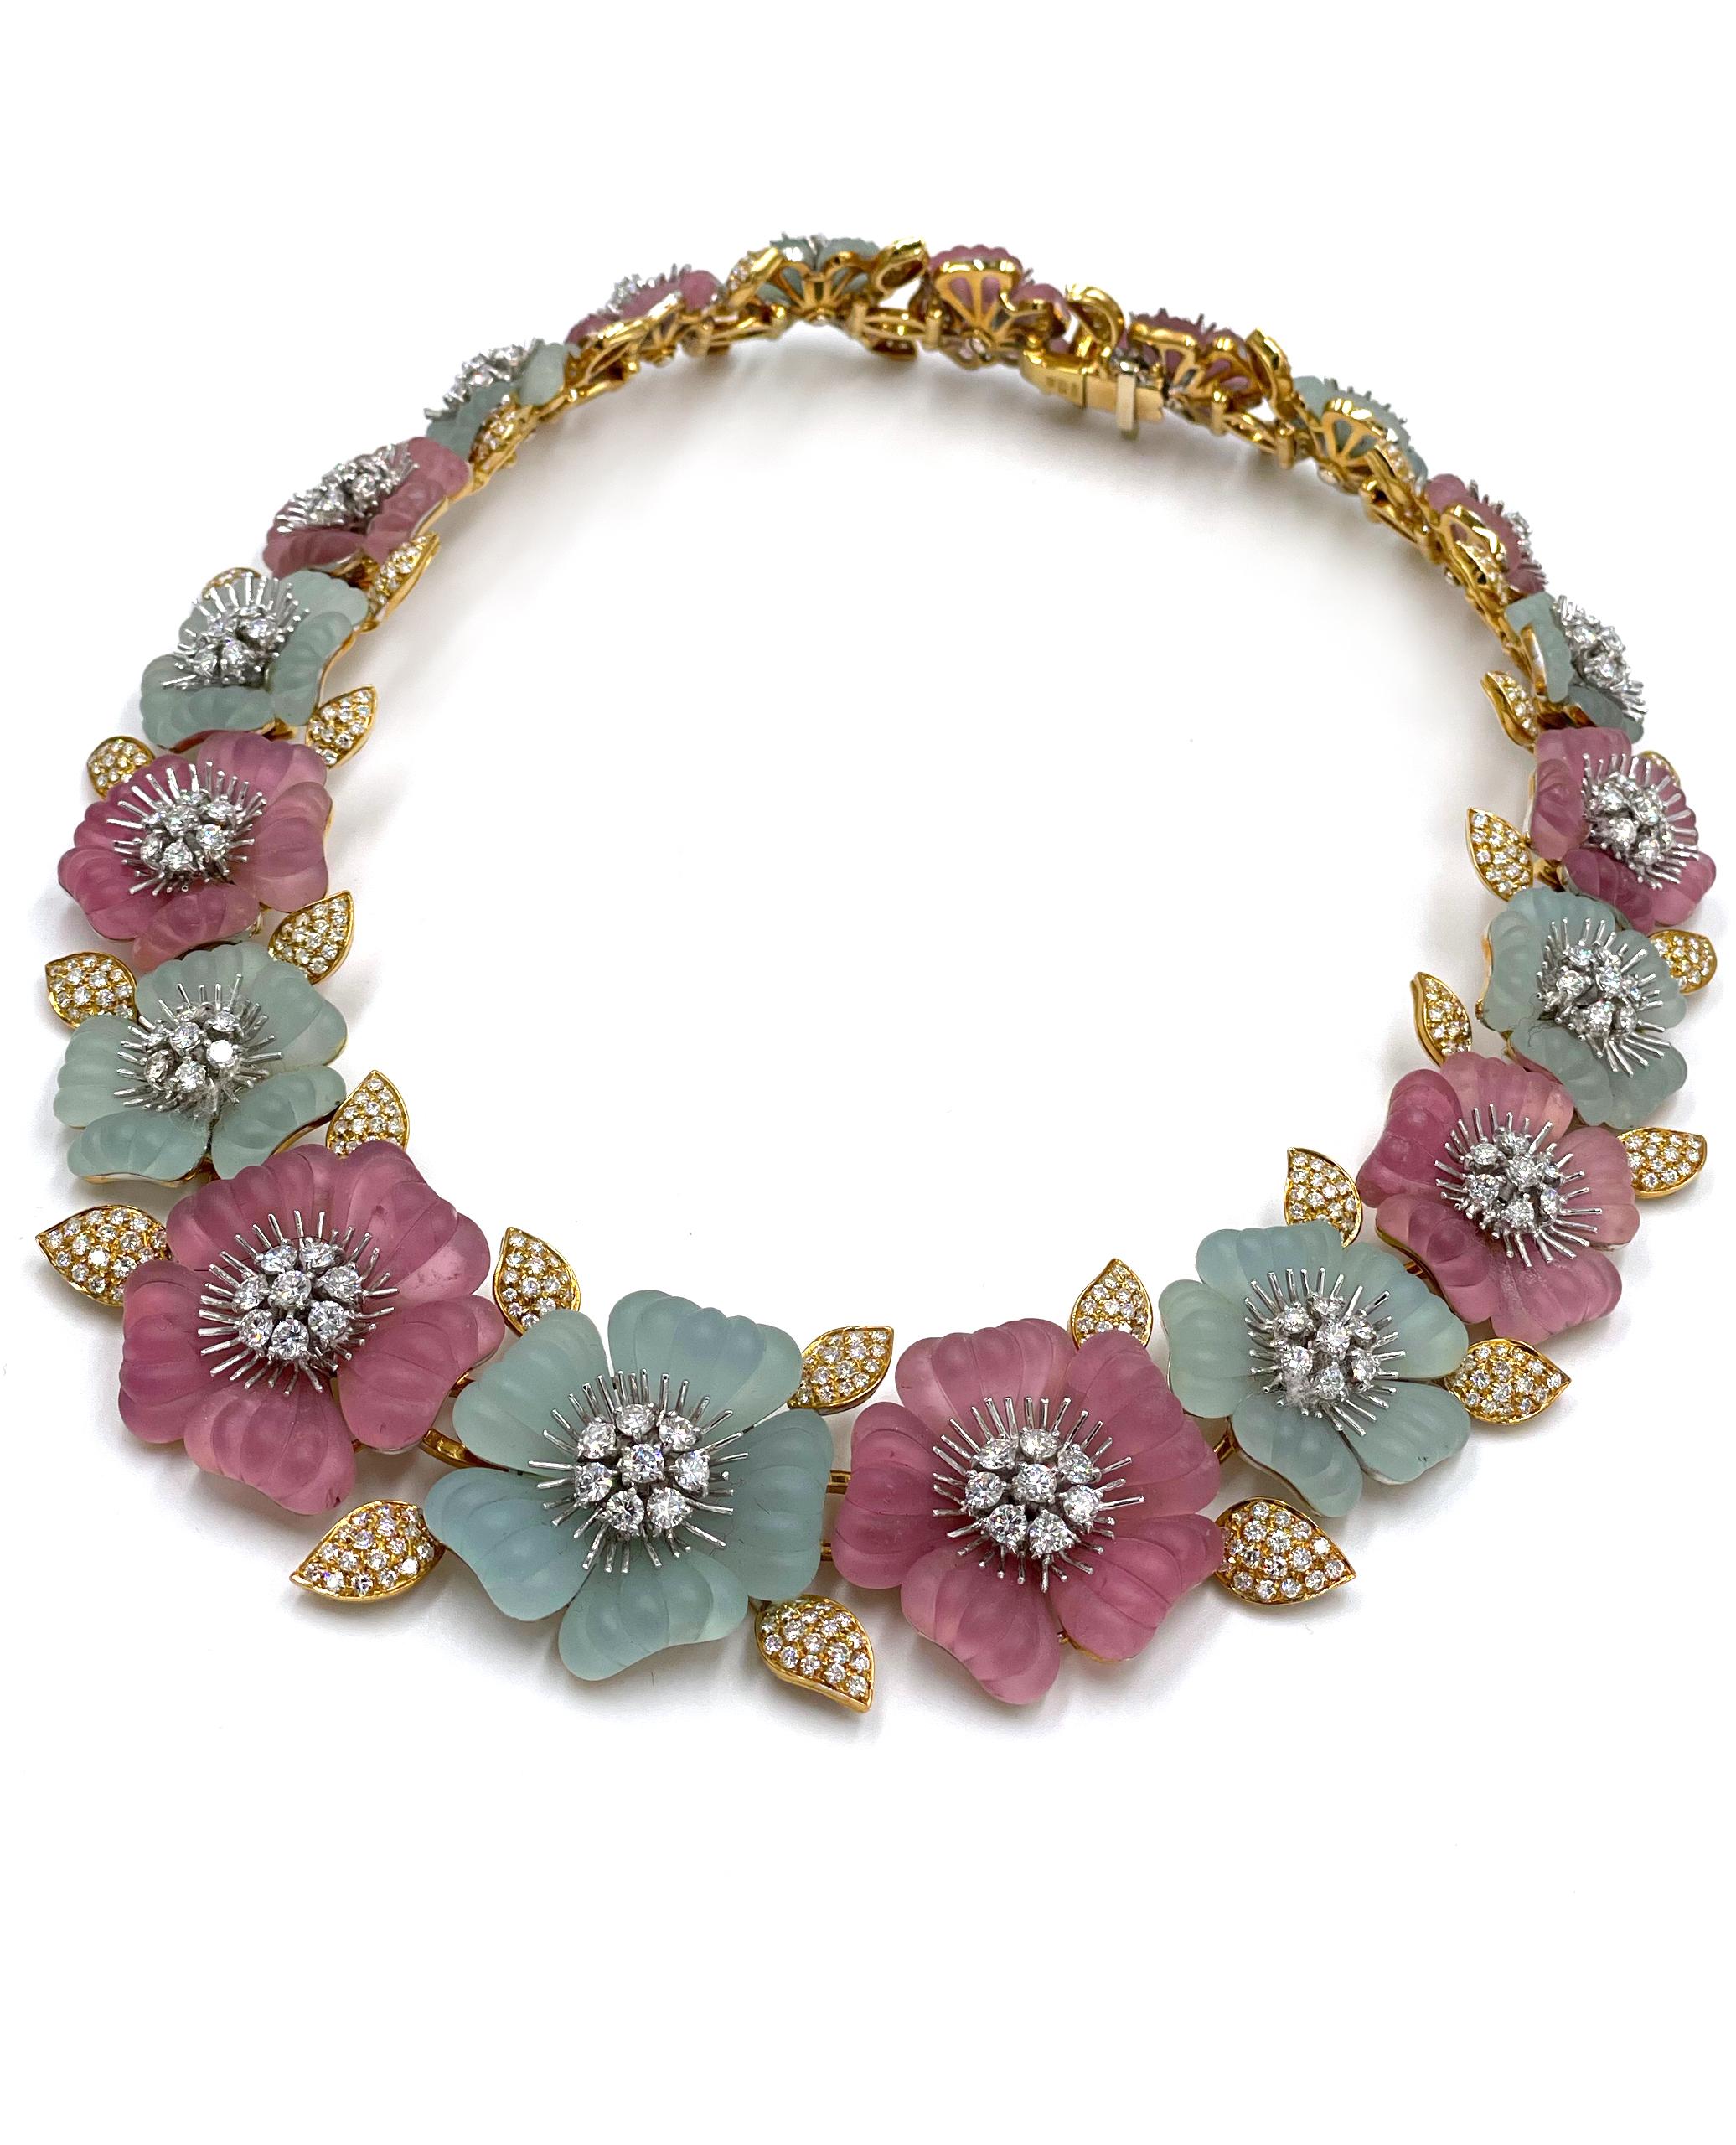 Pre owned vintage estate Ambrosi 18K white and yellow gold one of a kind aquamarine, pink tourmaline and diamond floral necklace.  The hand crafted necklace consists of 10 hand carved flowers alternating pink tourmaline and aquamarine.  The center